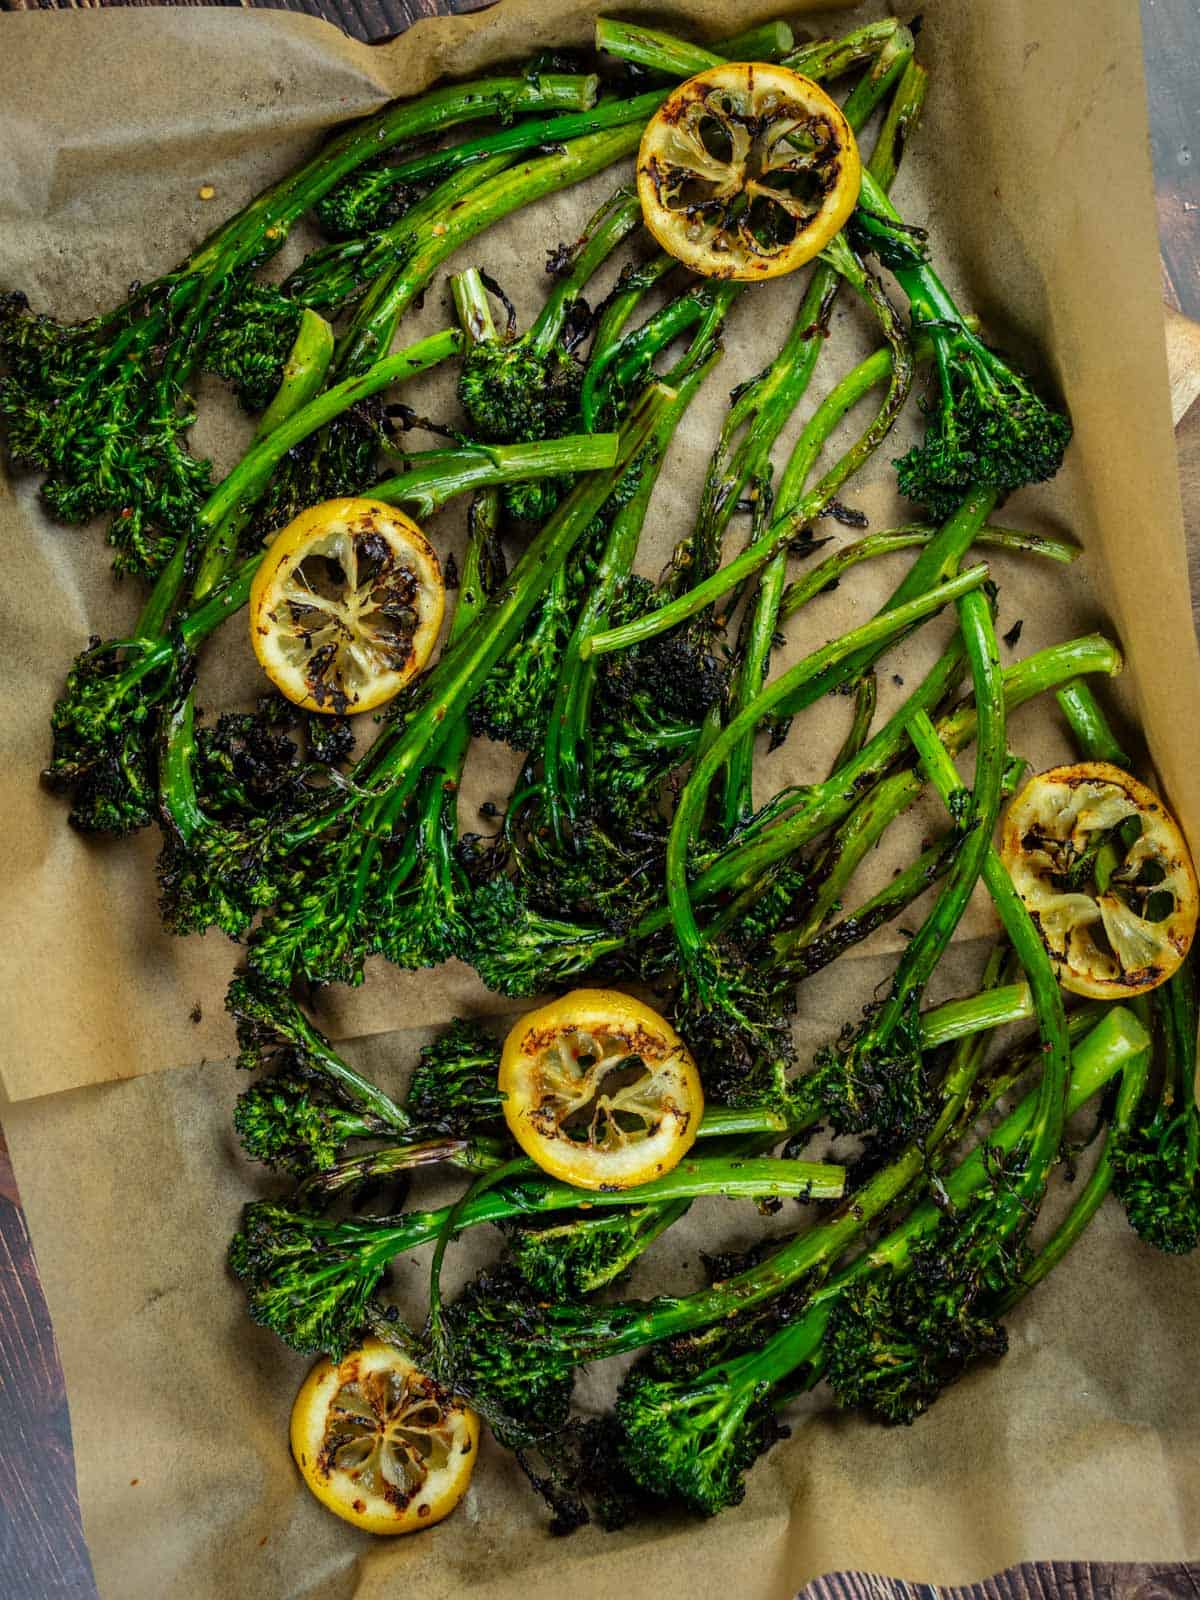 grilled broccolini with grilled lemon slices on a sheet pan lined with parchment paper.